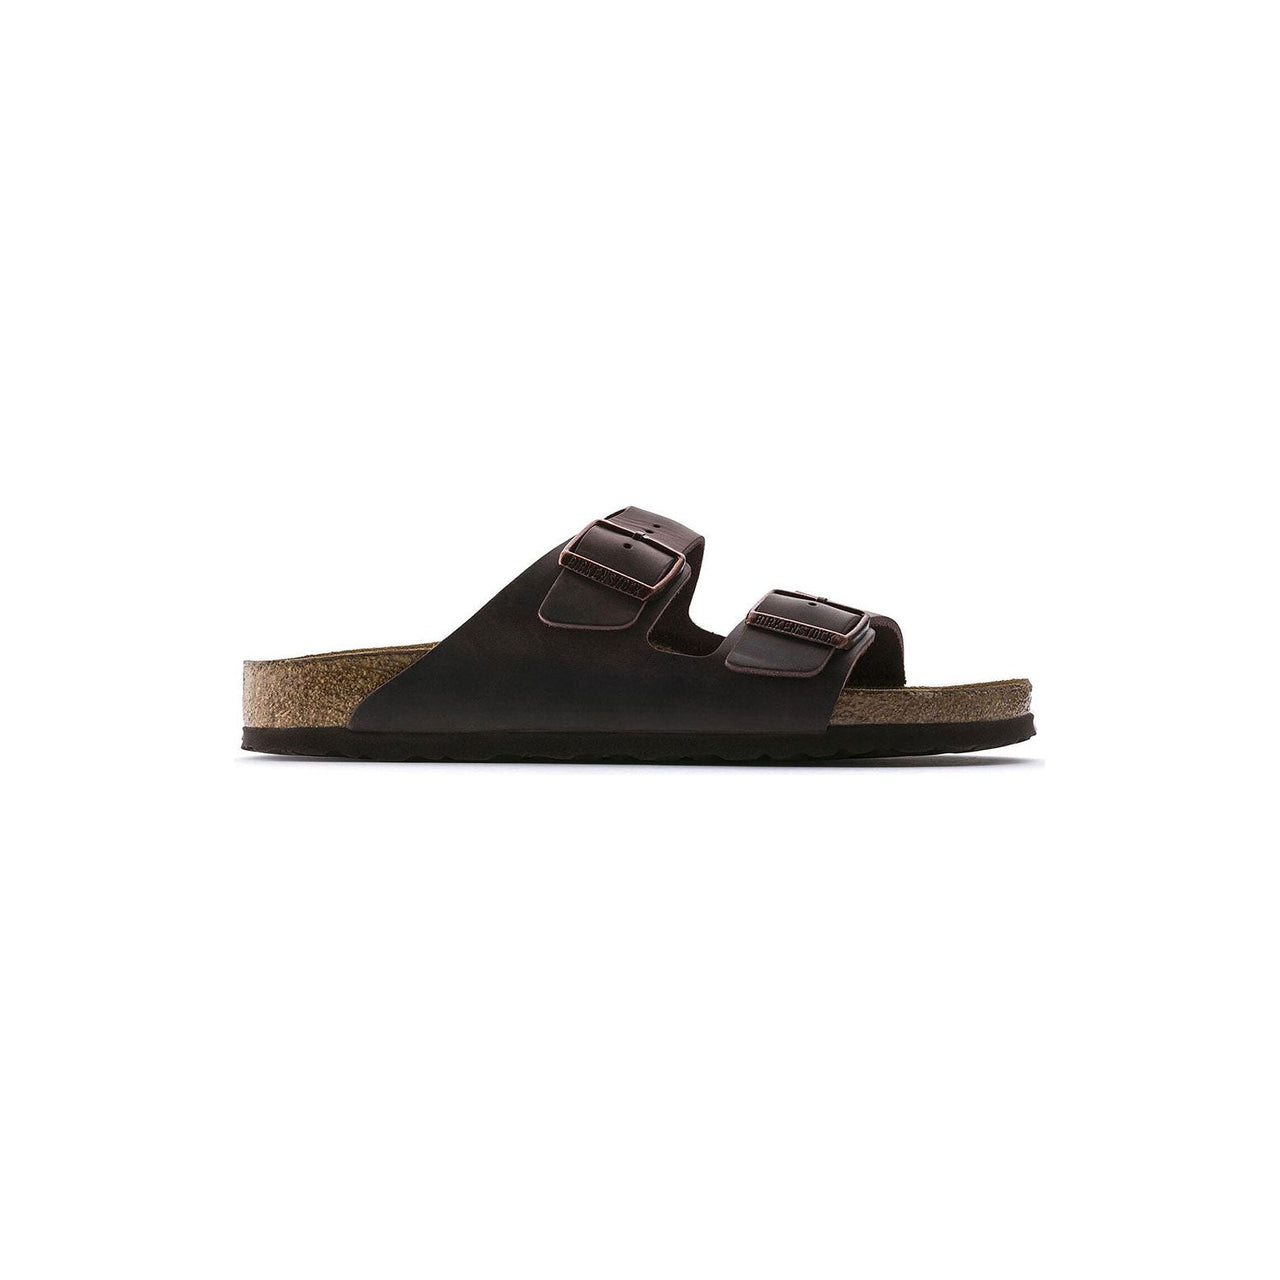 Arizona Soft Footbed Sandals Habana - Close-up of durable and supportive sandals for all-day wear